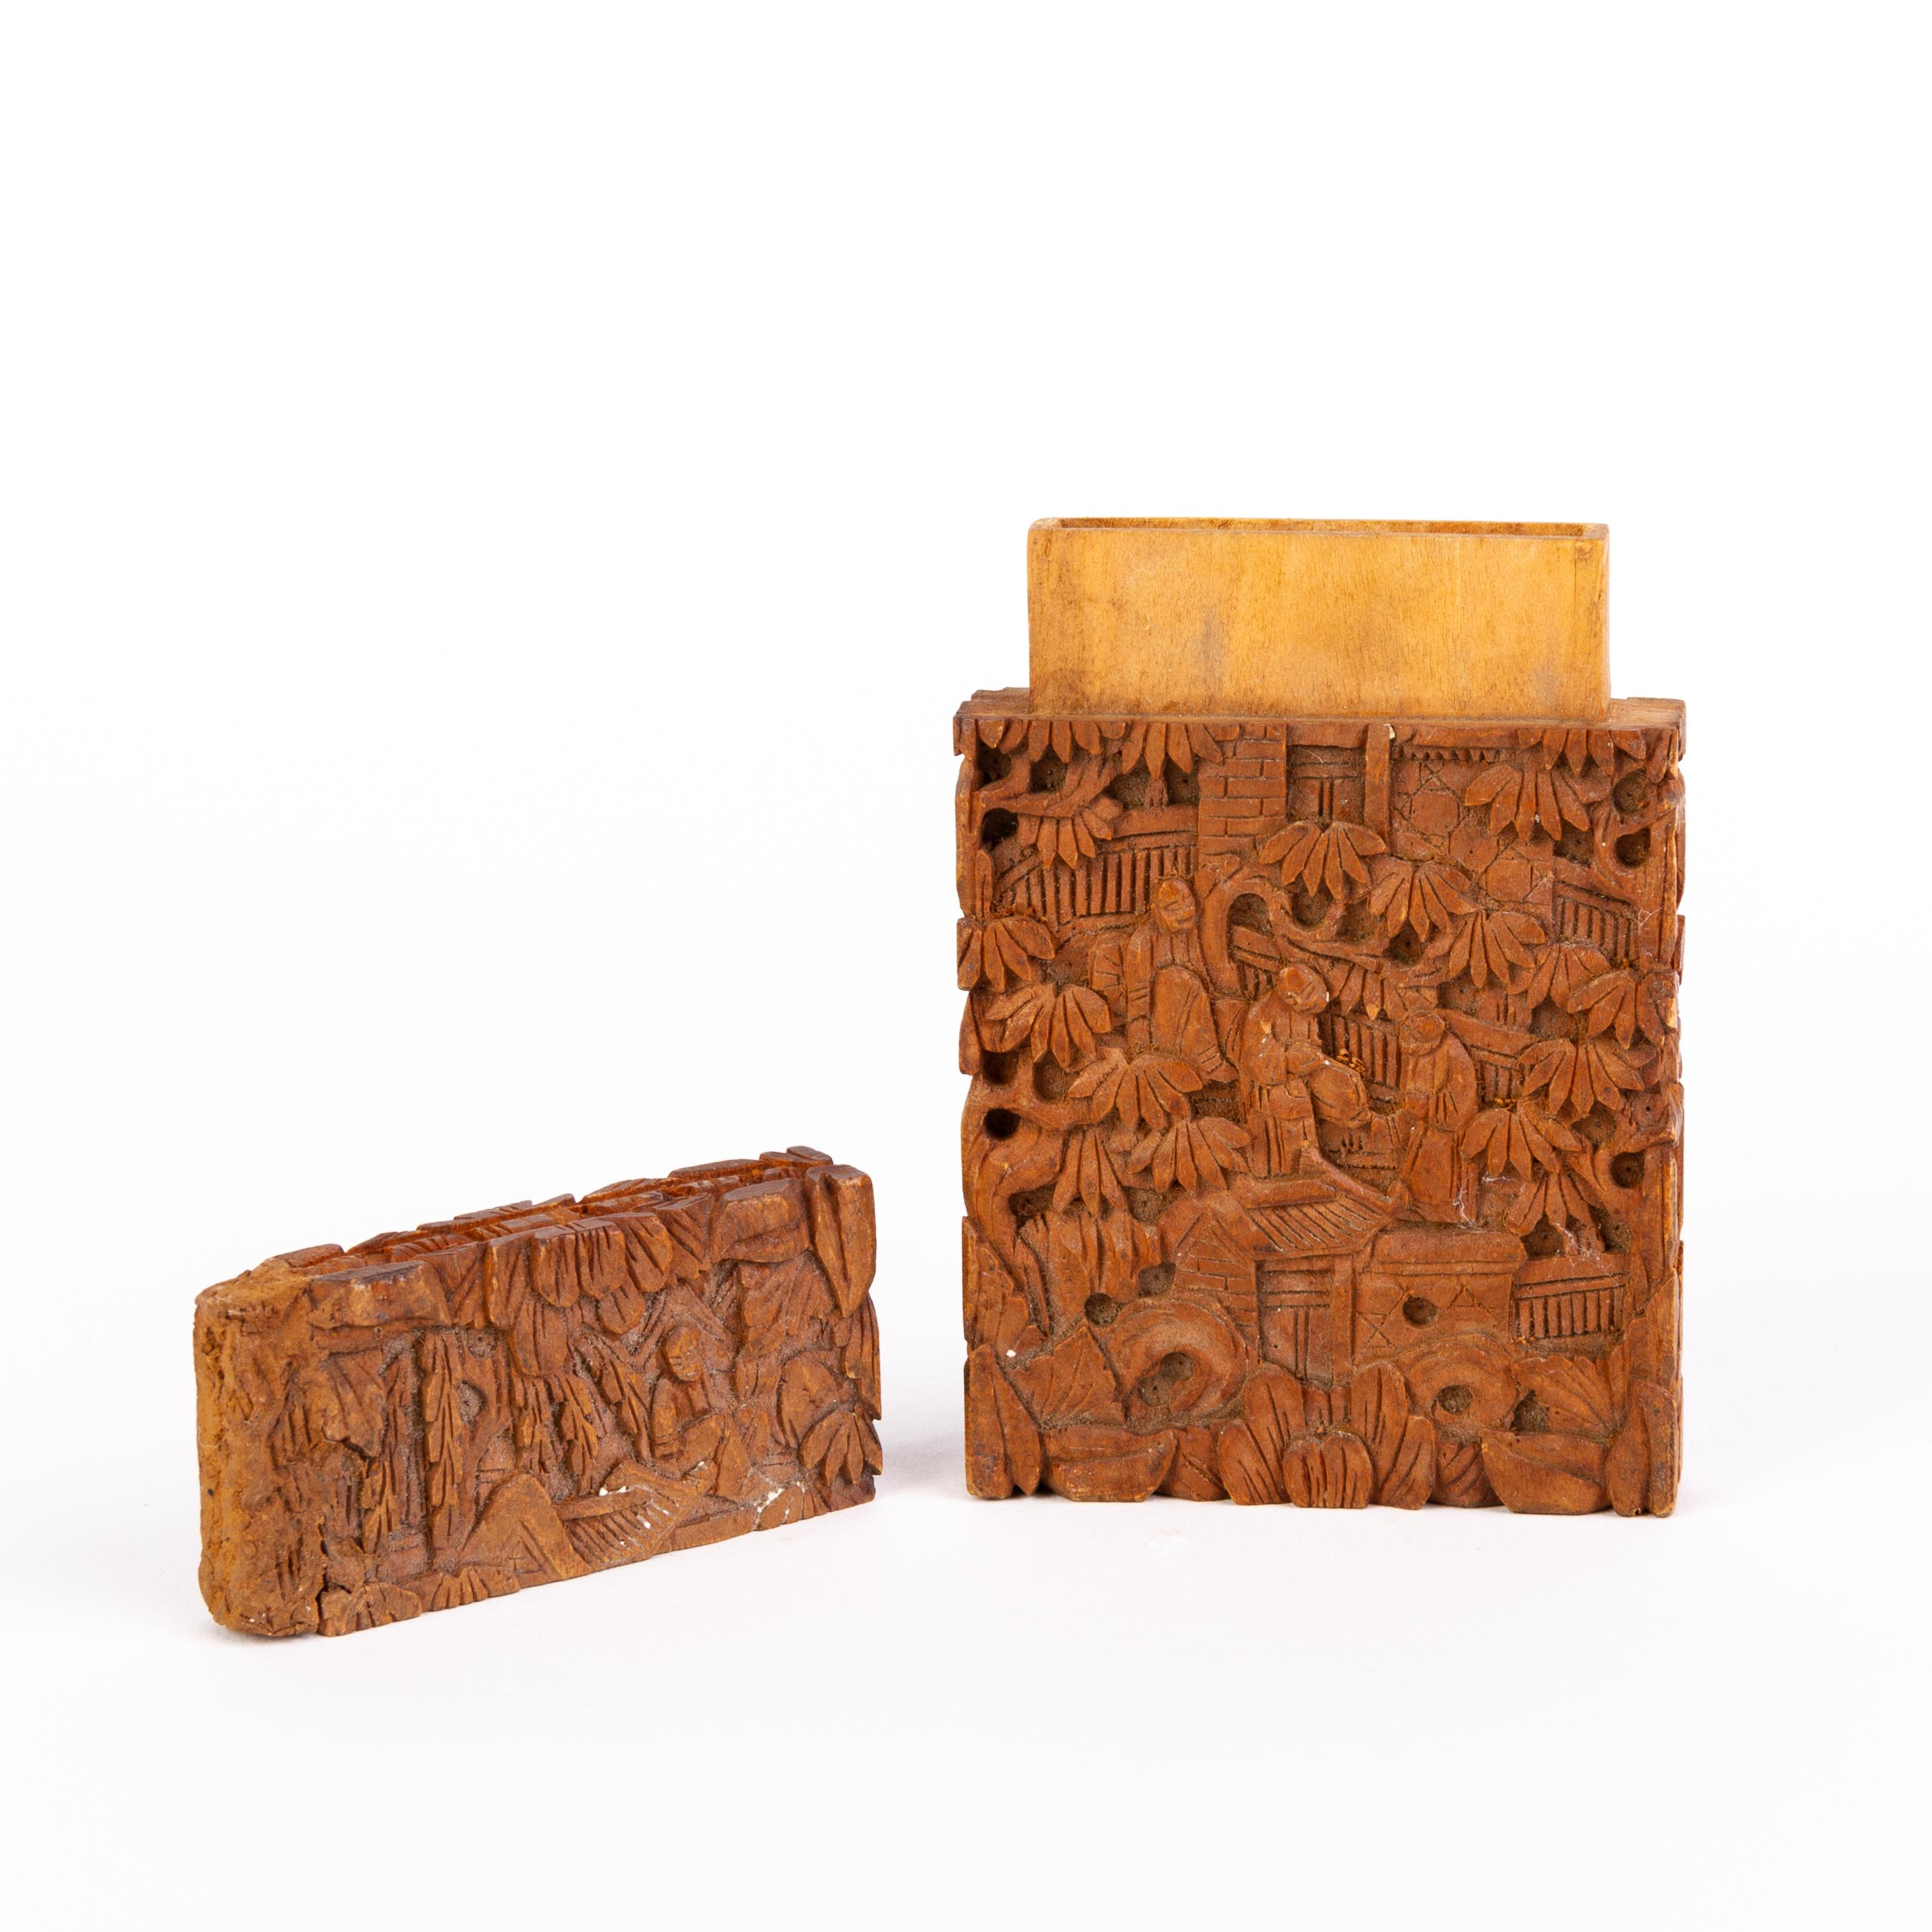 Chinese Qing Carved Boxwood Cantonese Canton Card Case 19th Century 
Good overall condition, as seen.
From a private collection.
Free international shipping.